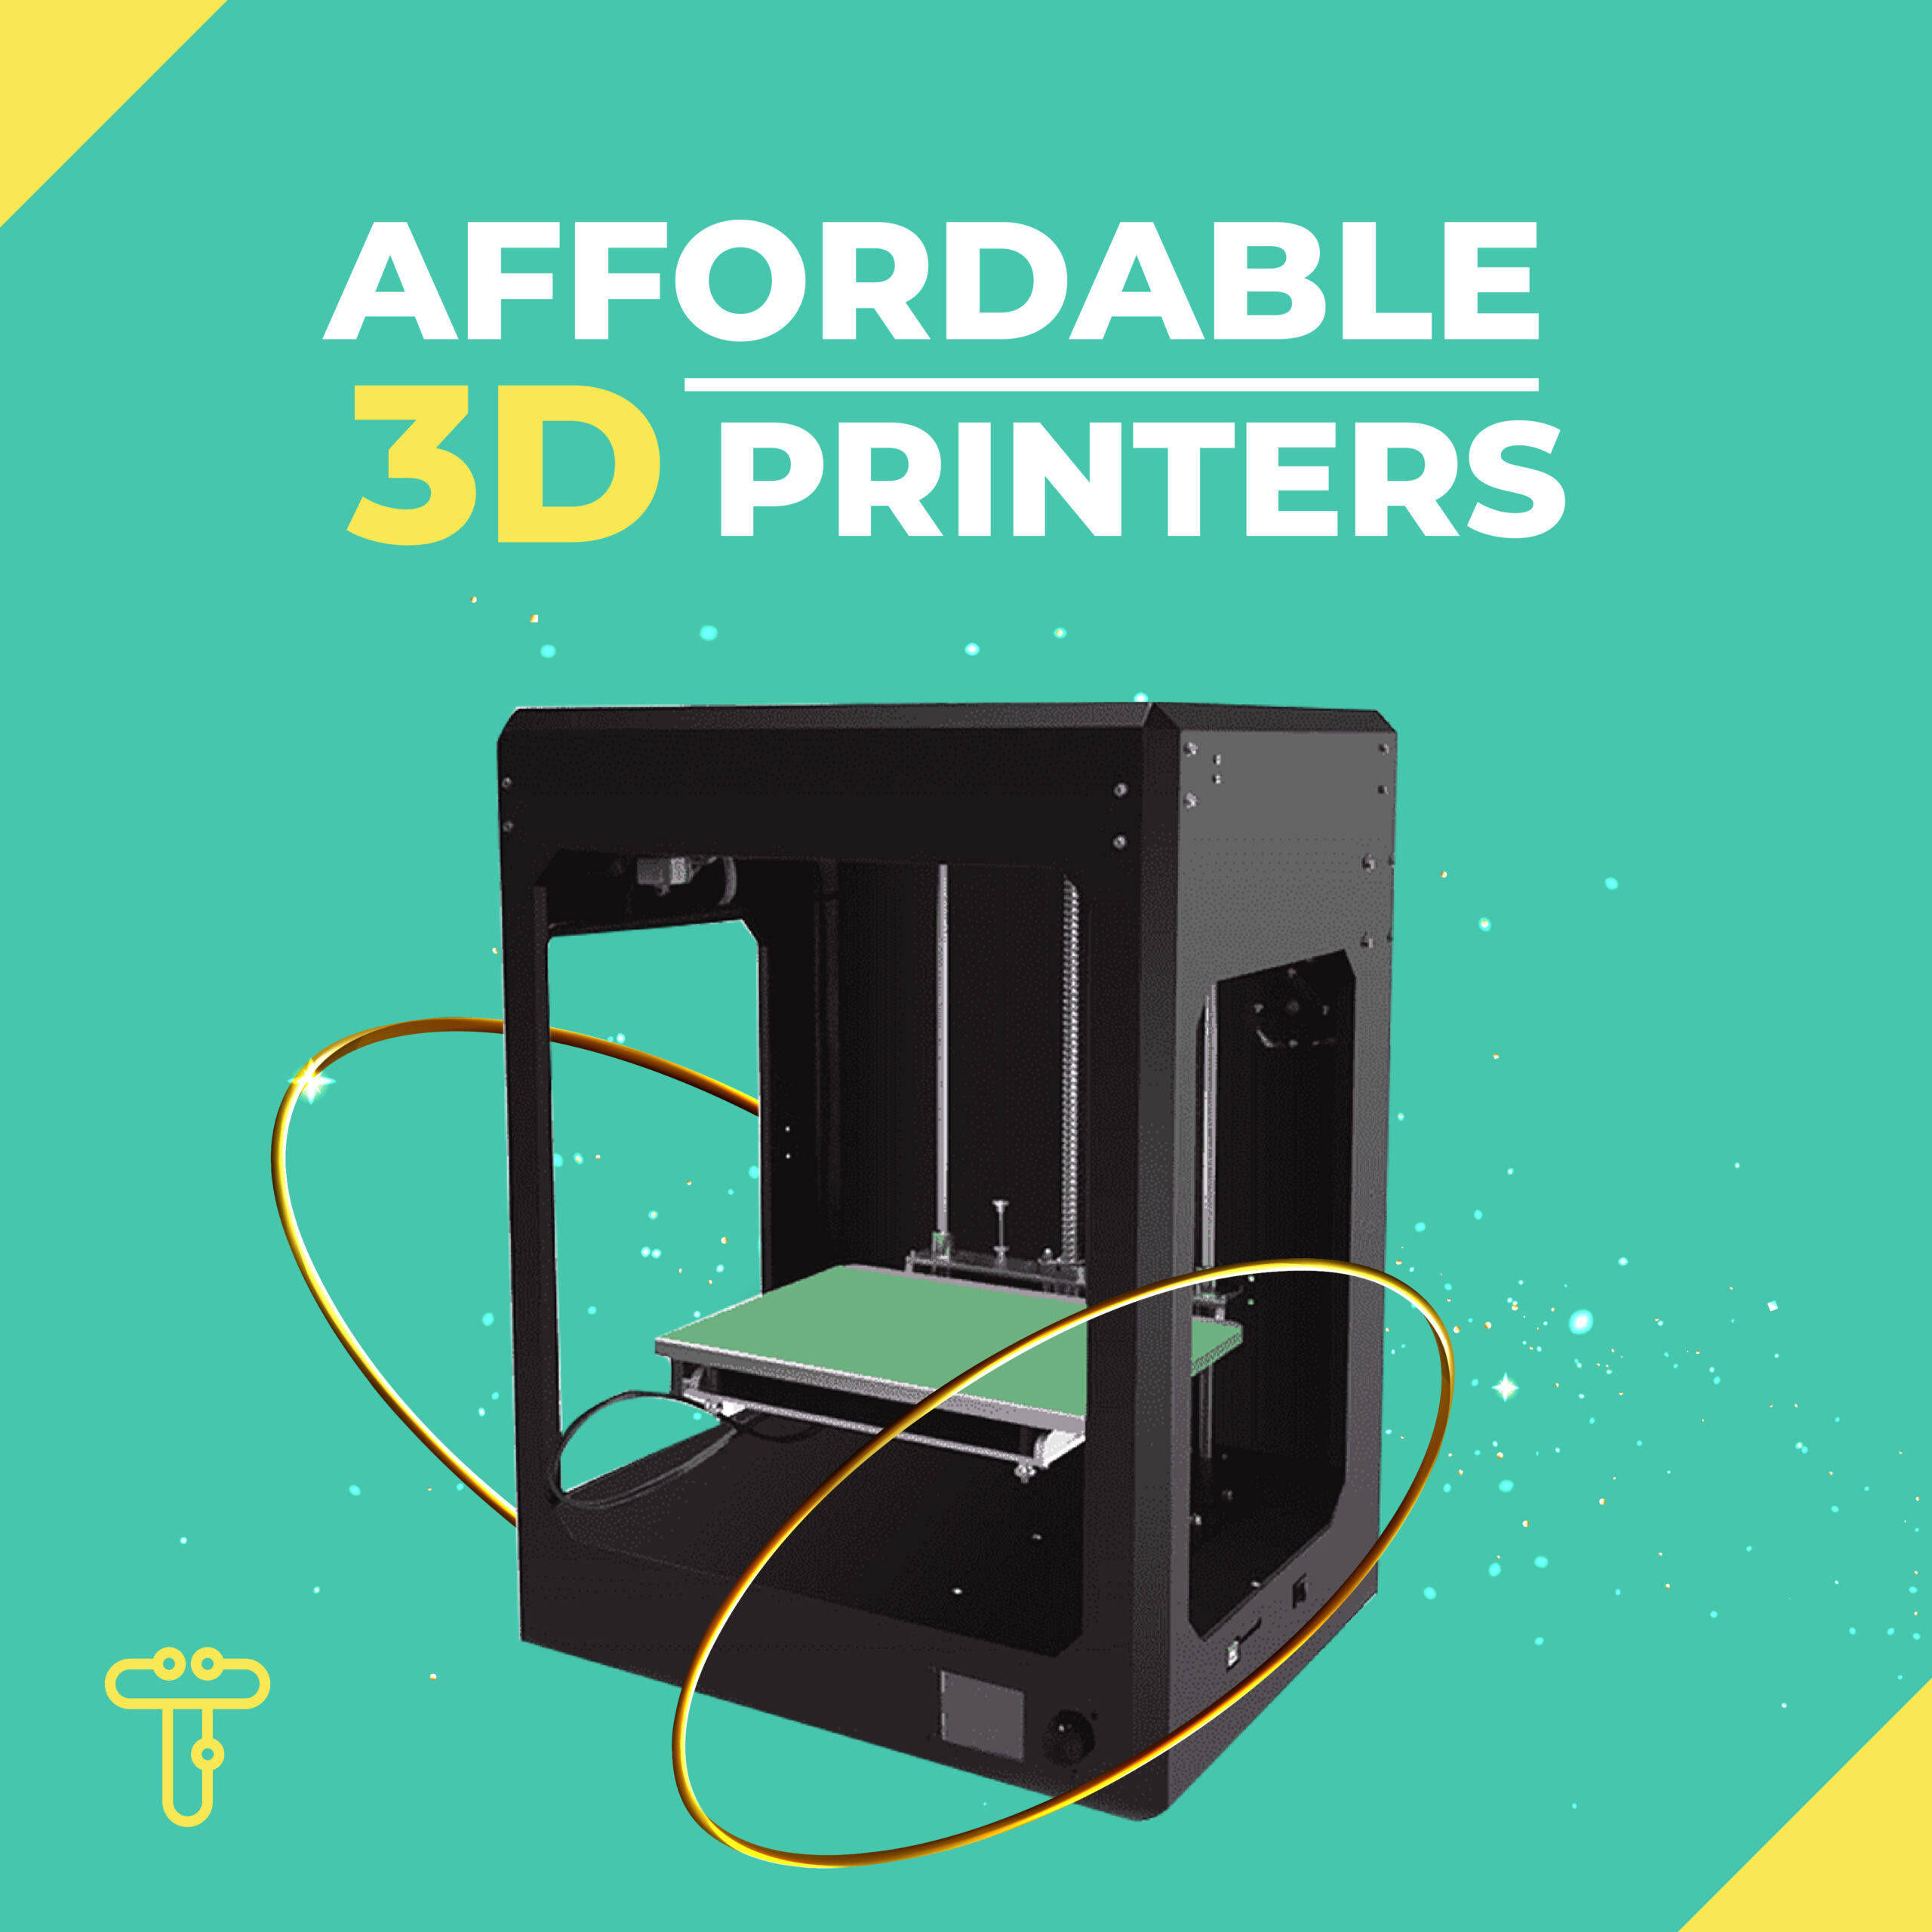 Affordable 3D Printers image 1 scaled Techie Trickle